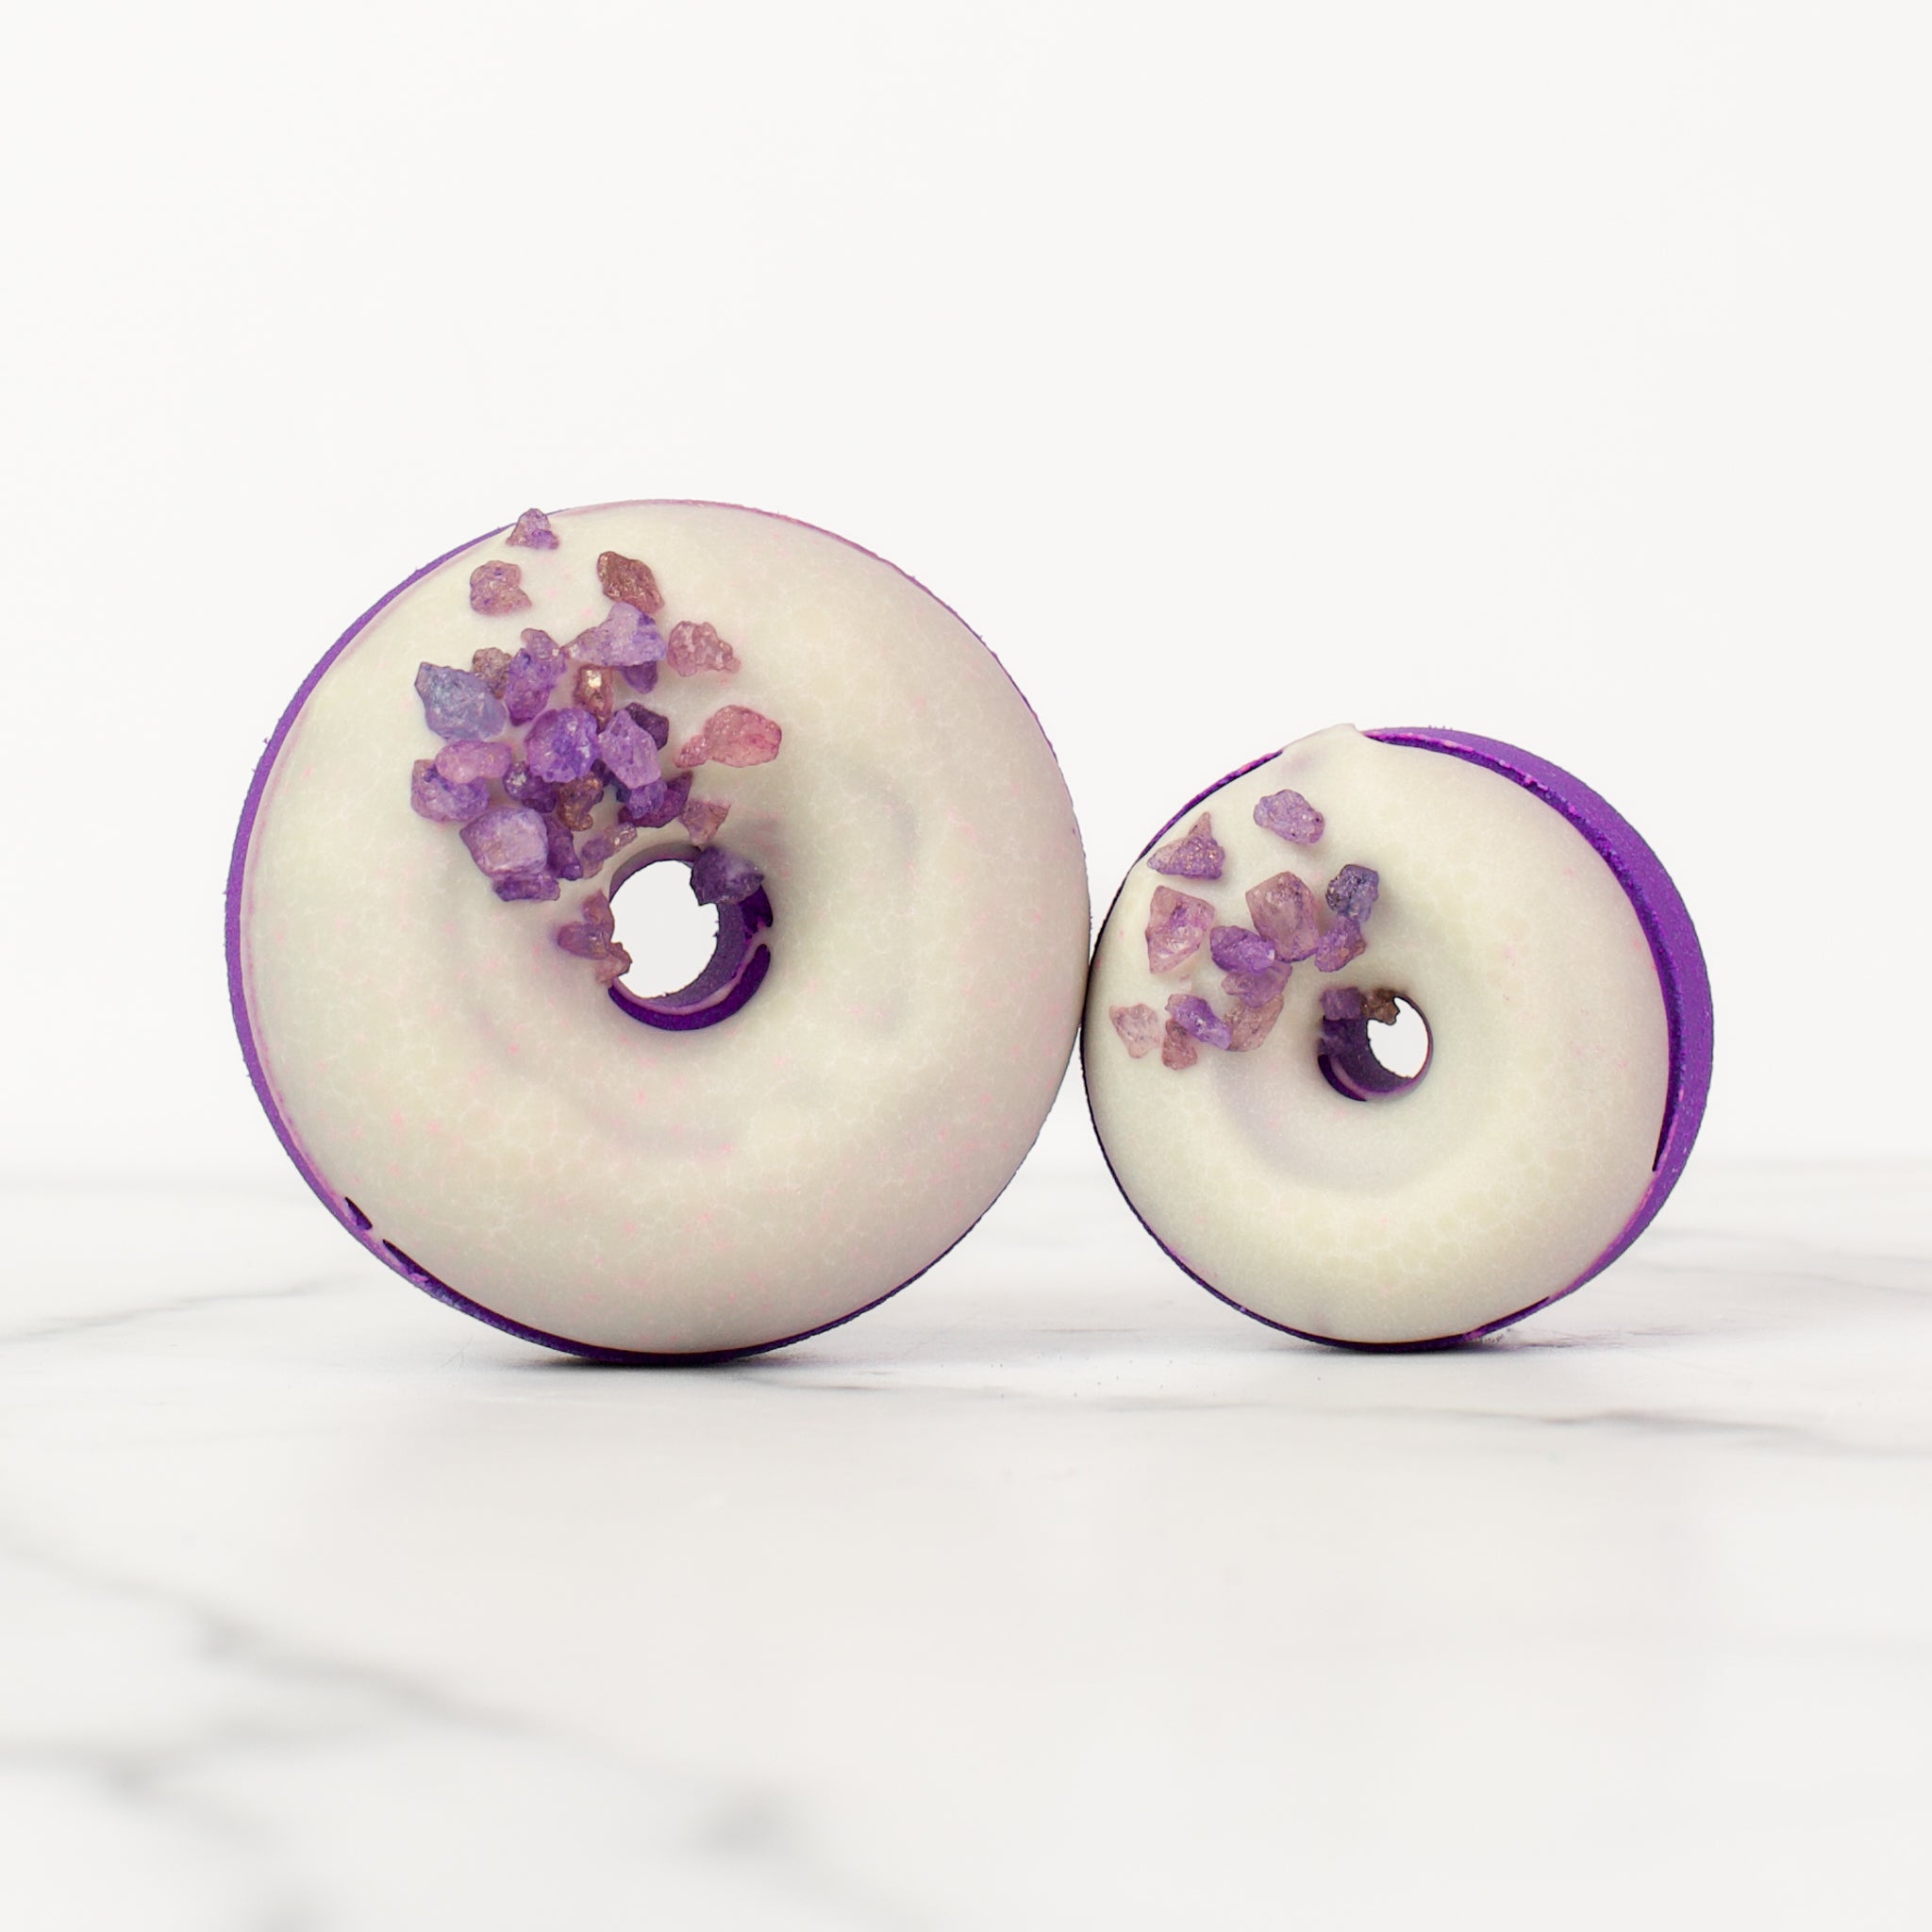 One large and one small donut Moonflower bath bombs on a white background. Moonflower is a dark purple bath bomb with a white glaze and purple gemstone sprinkles.